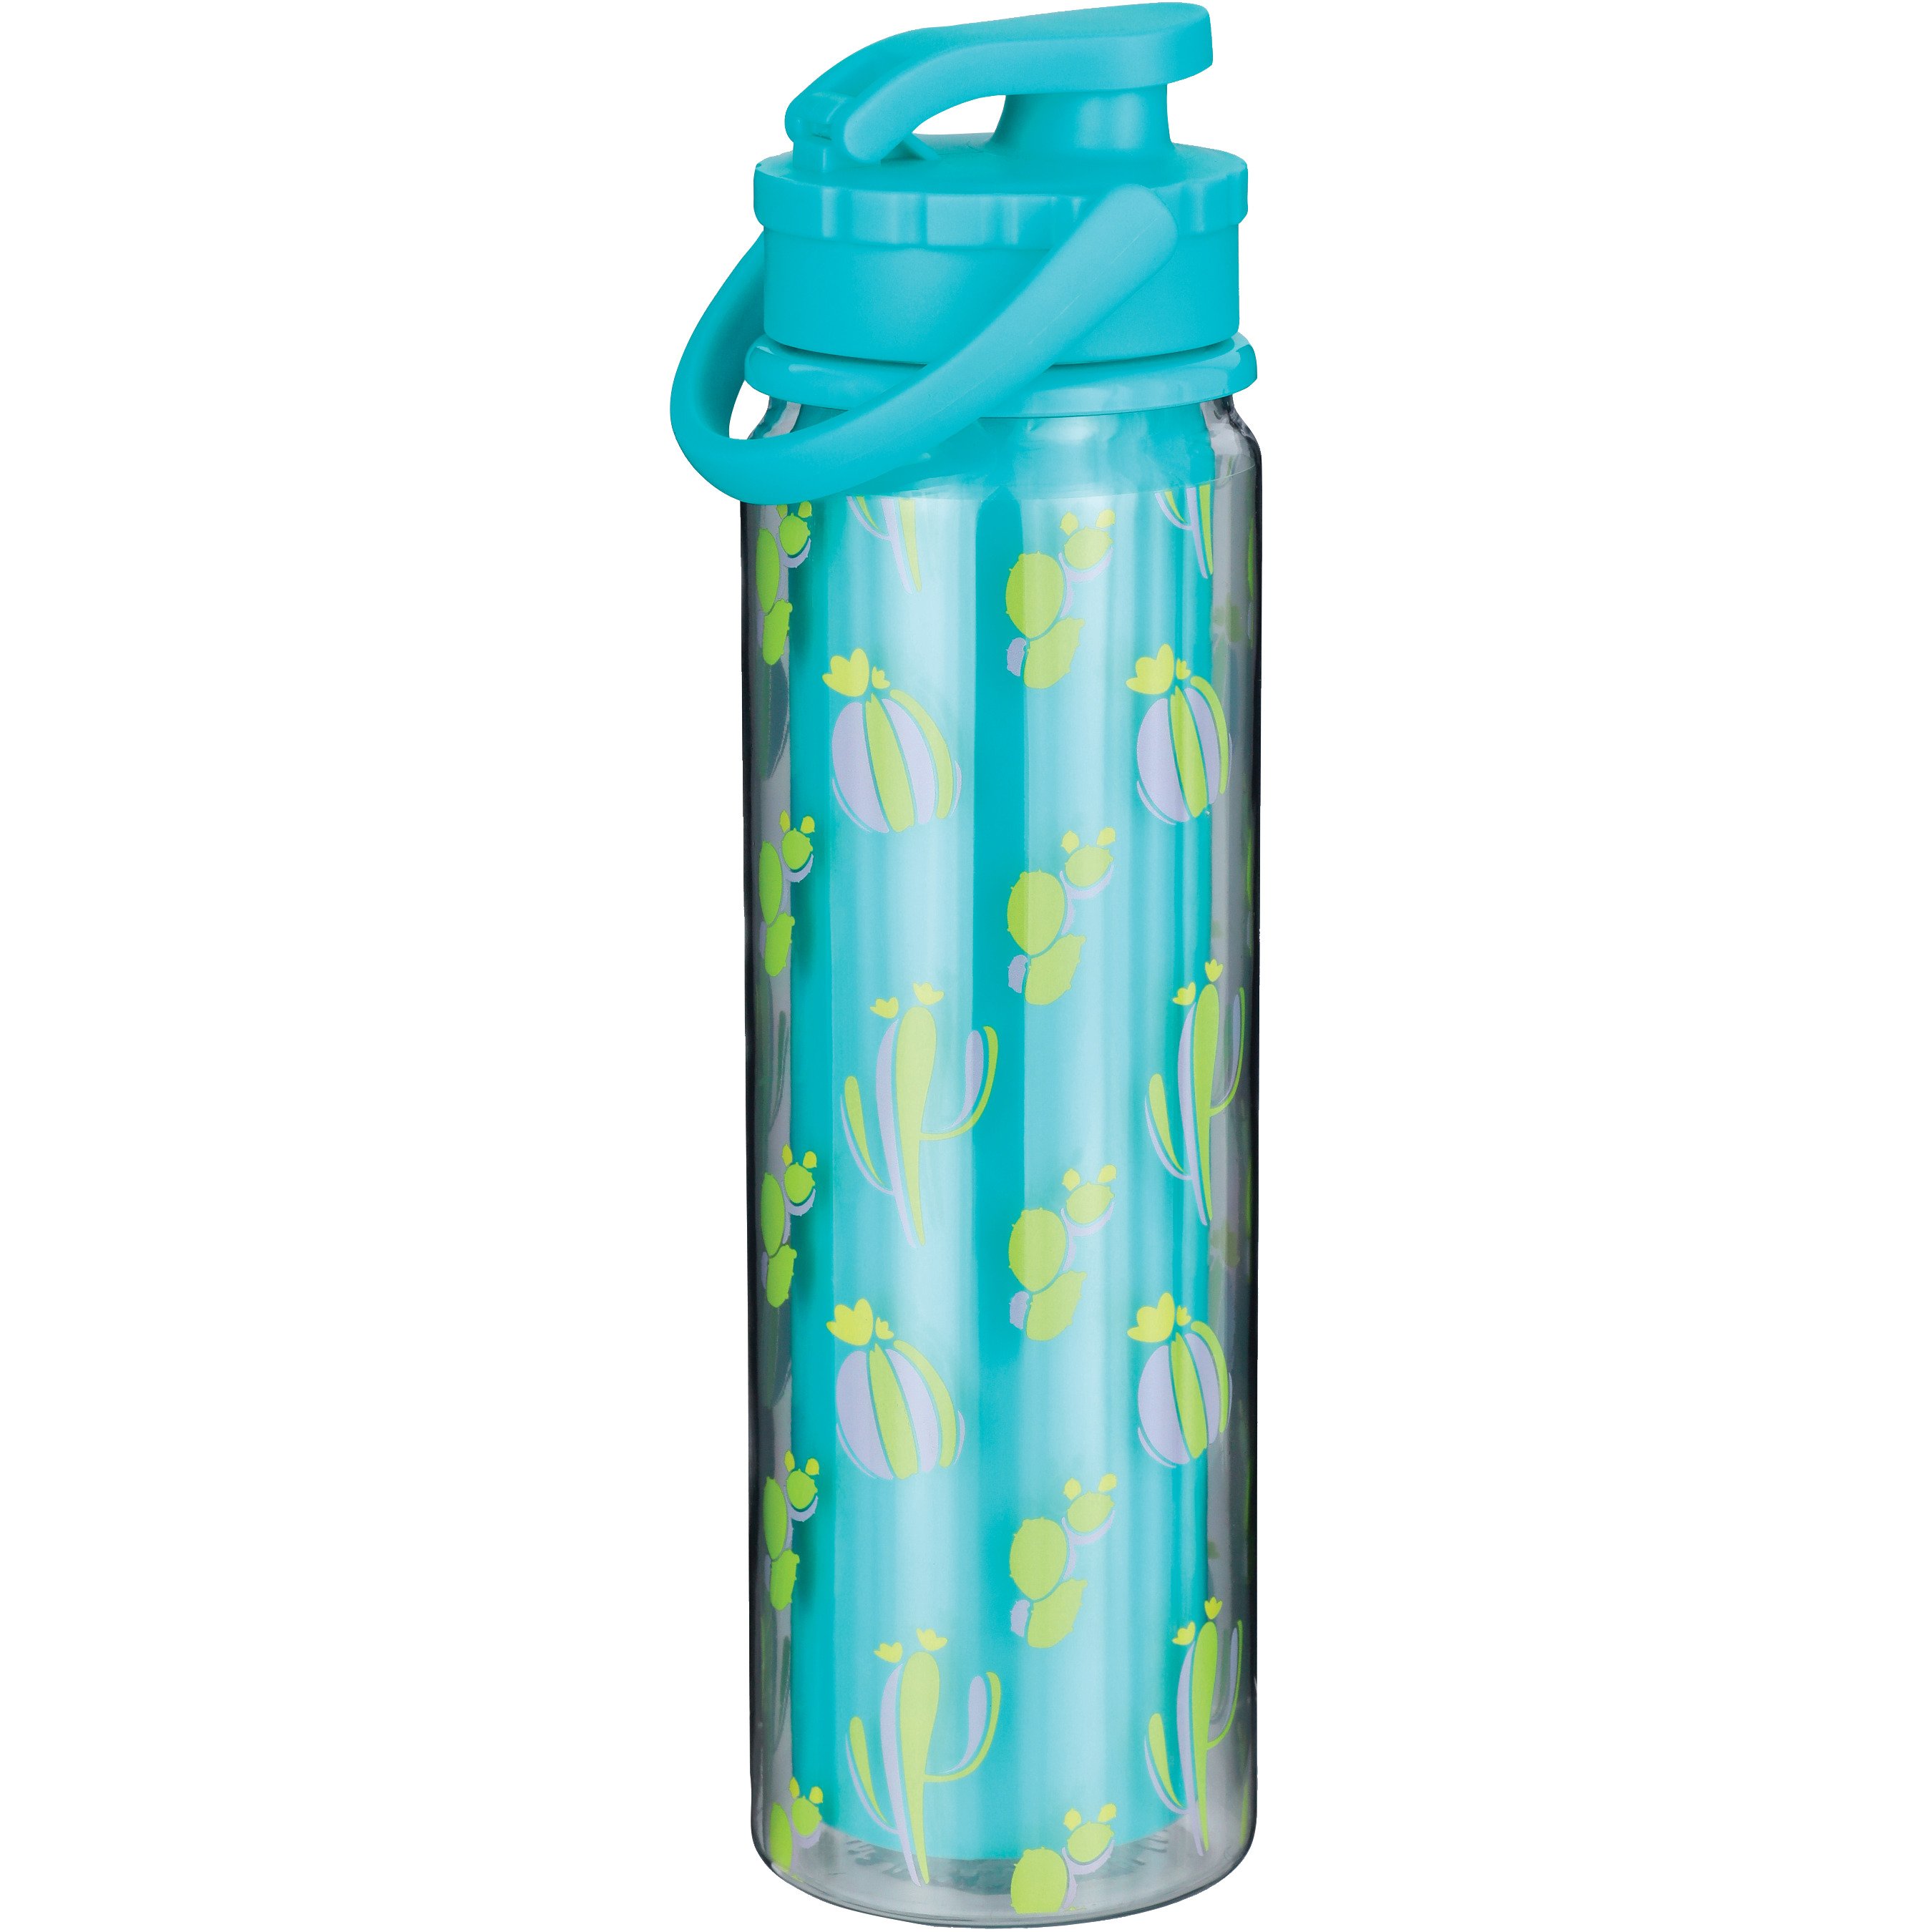 Destination Holiday Cactus Graphic Double Wall Reusable Water Bottle ...